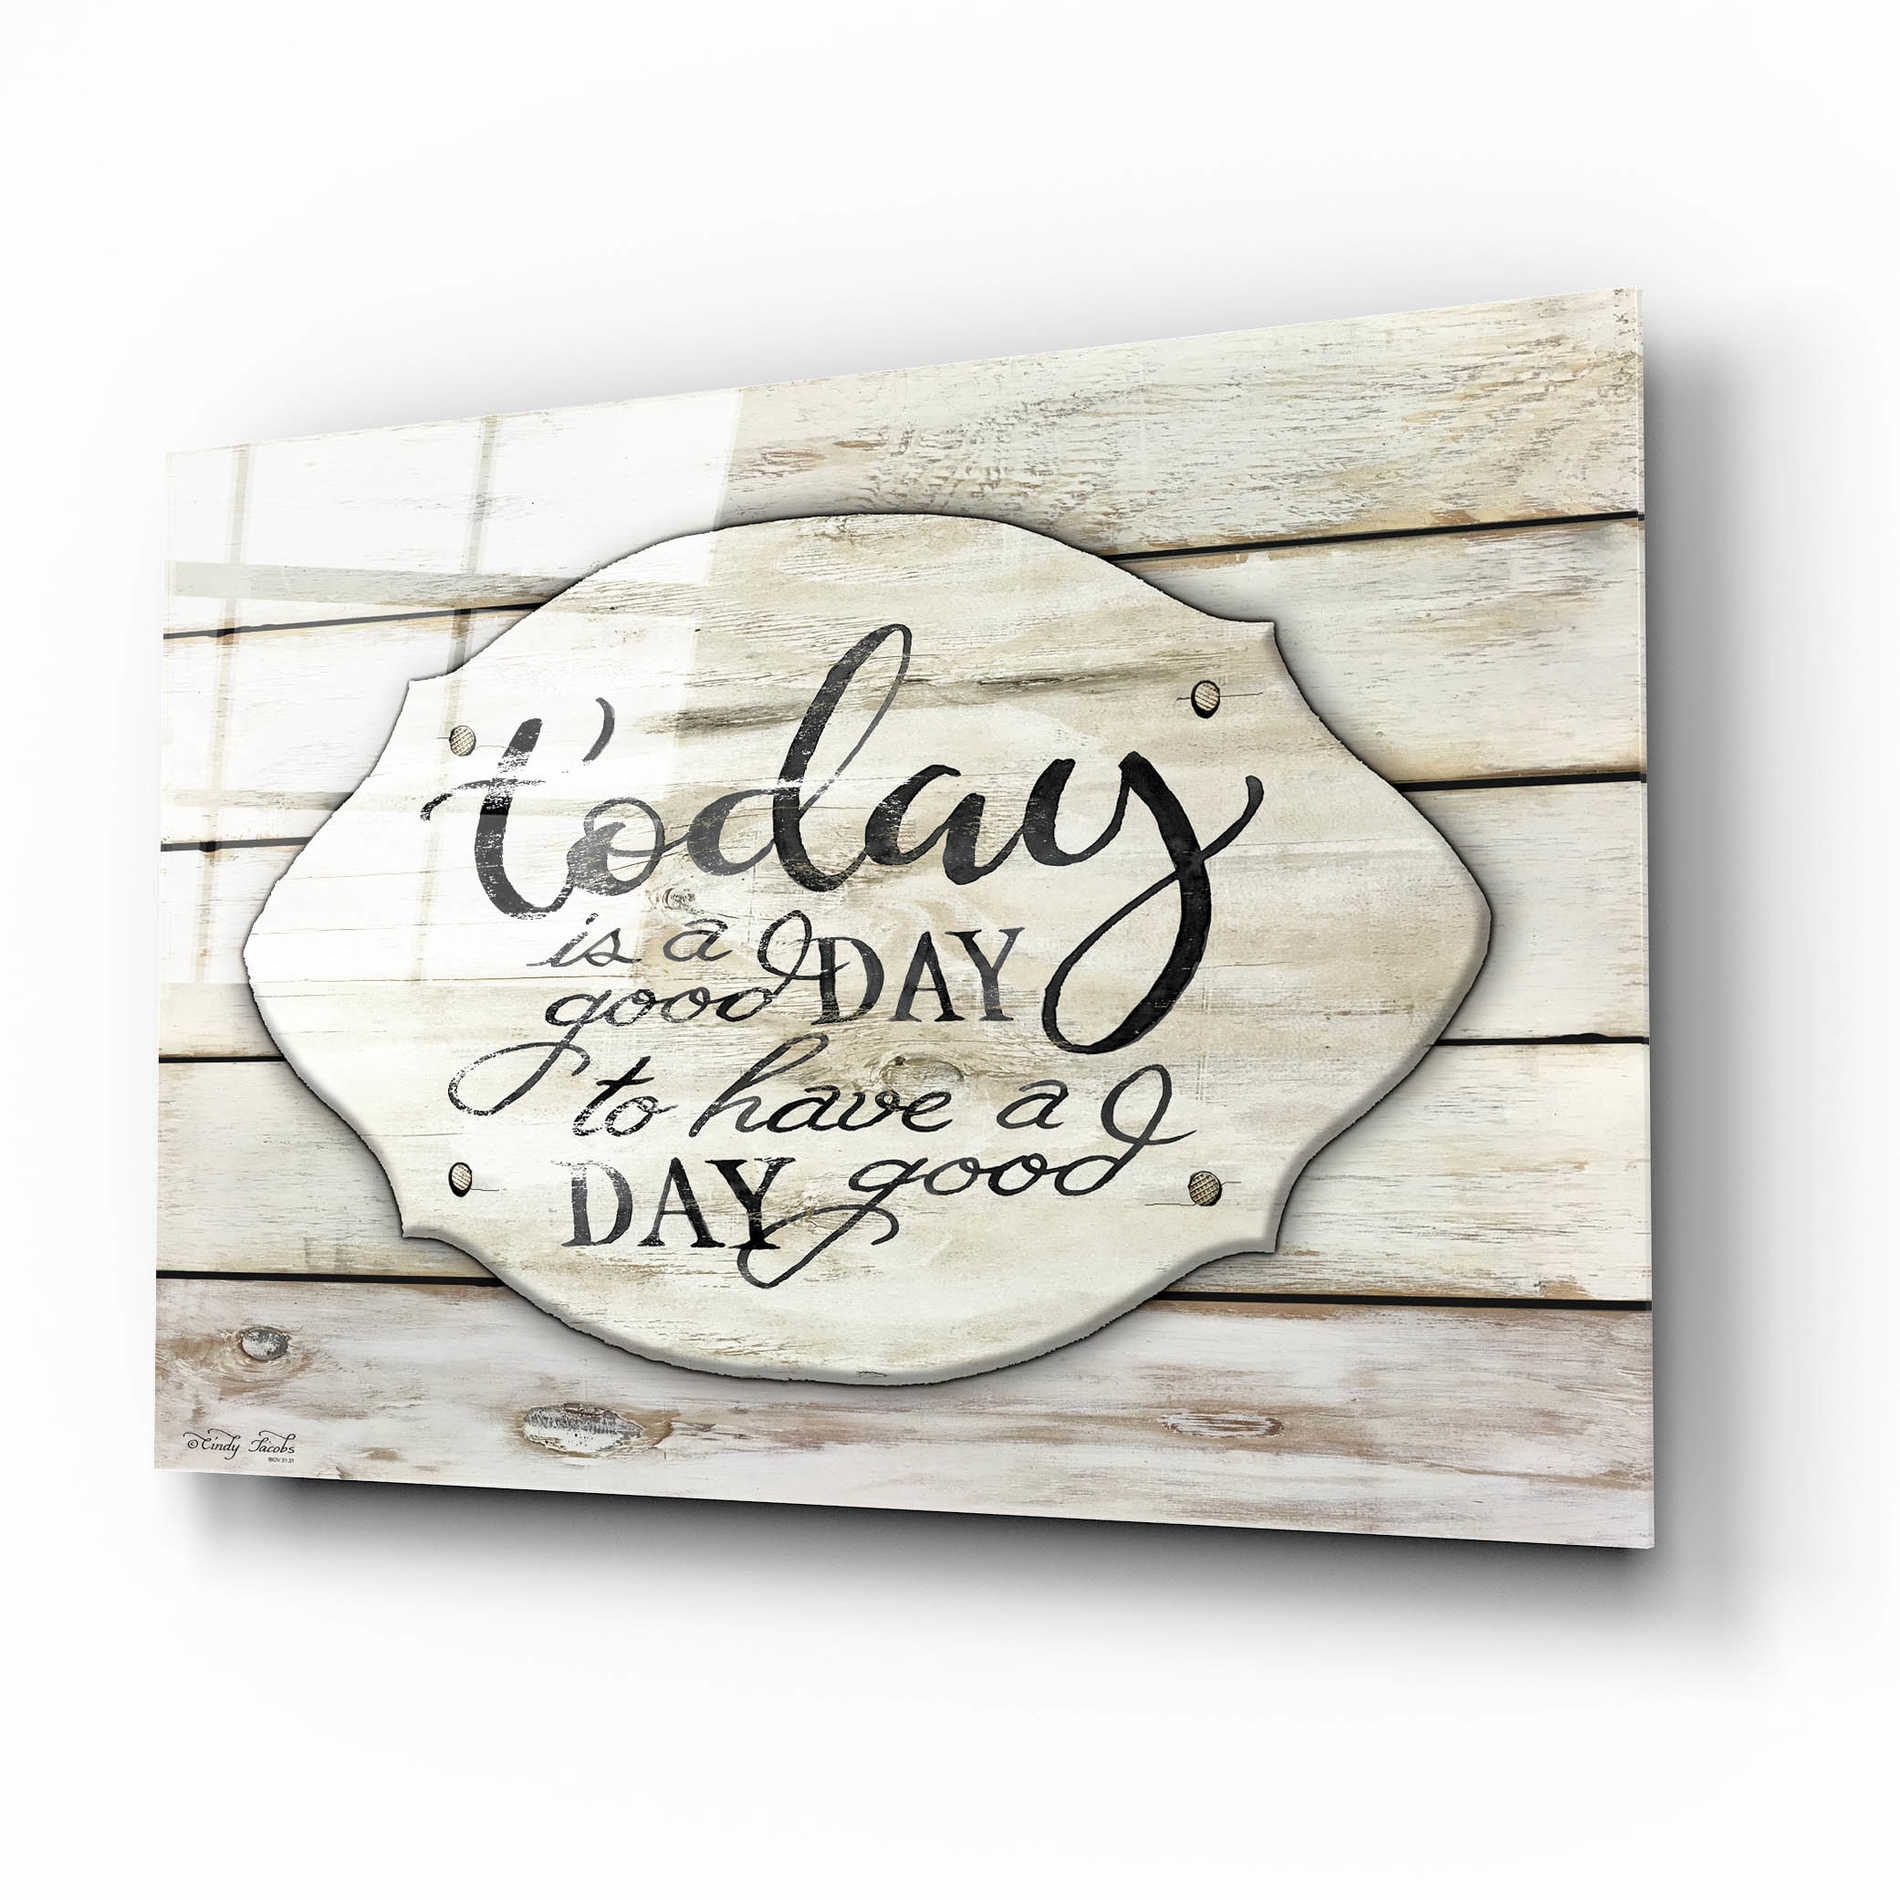 Epic Art 'Today is a Good Day' by Cindy Jacobs, Acrylic Glass Wall Art,16x12